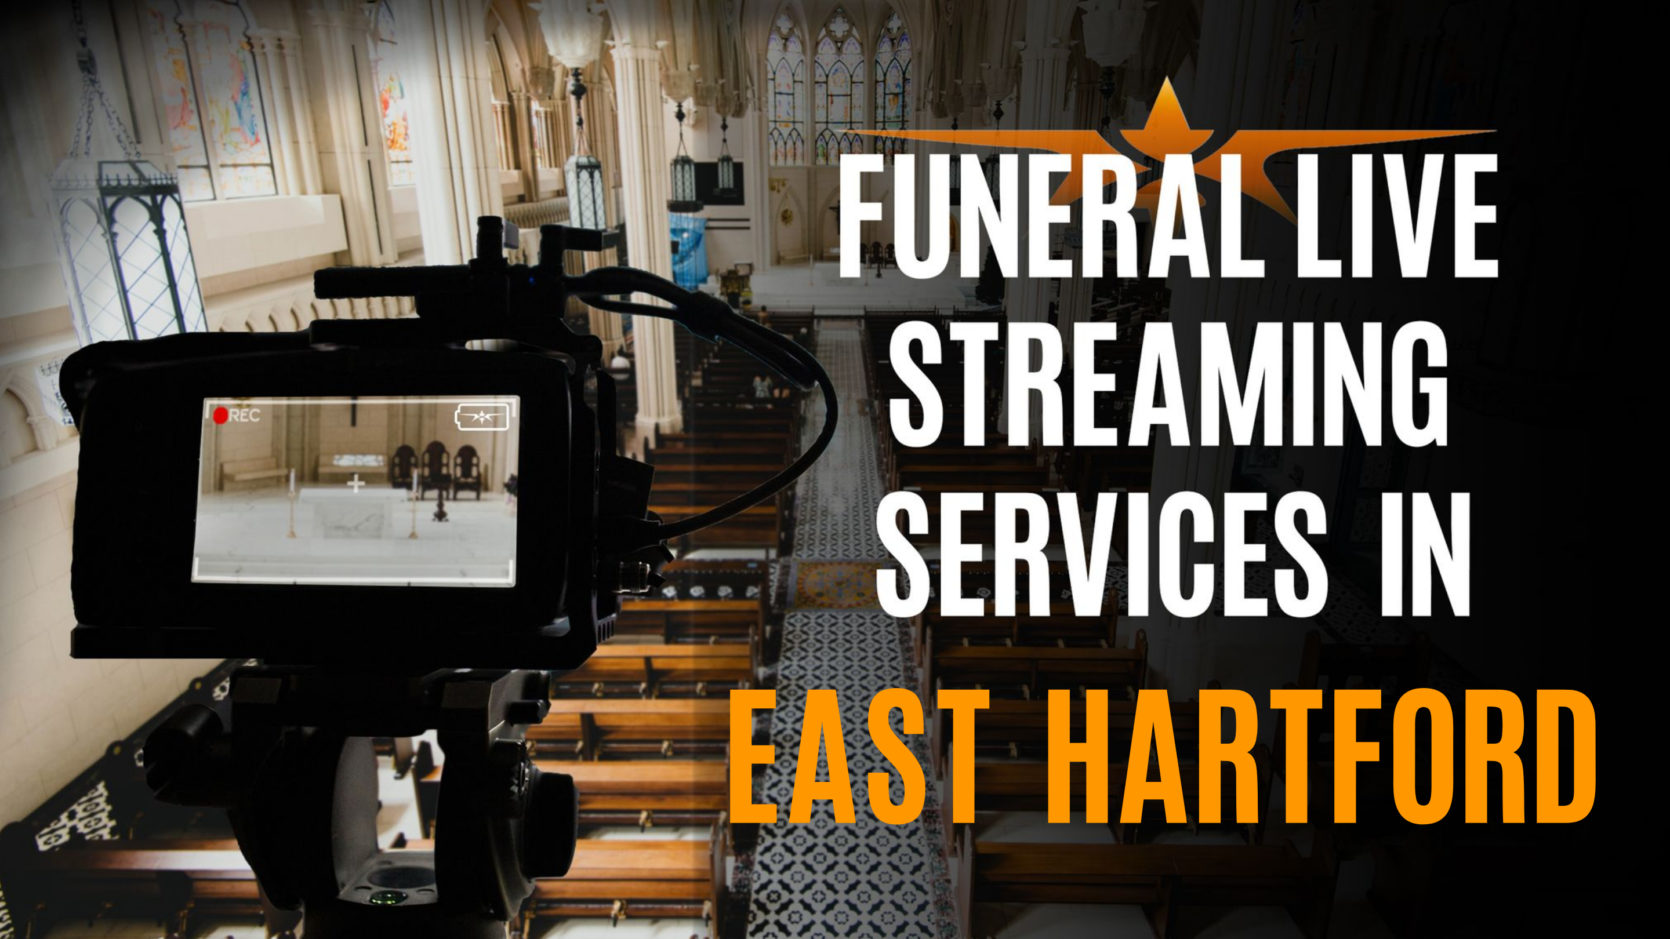 Funeral Live Streaming Services in East Hartford